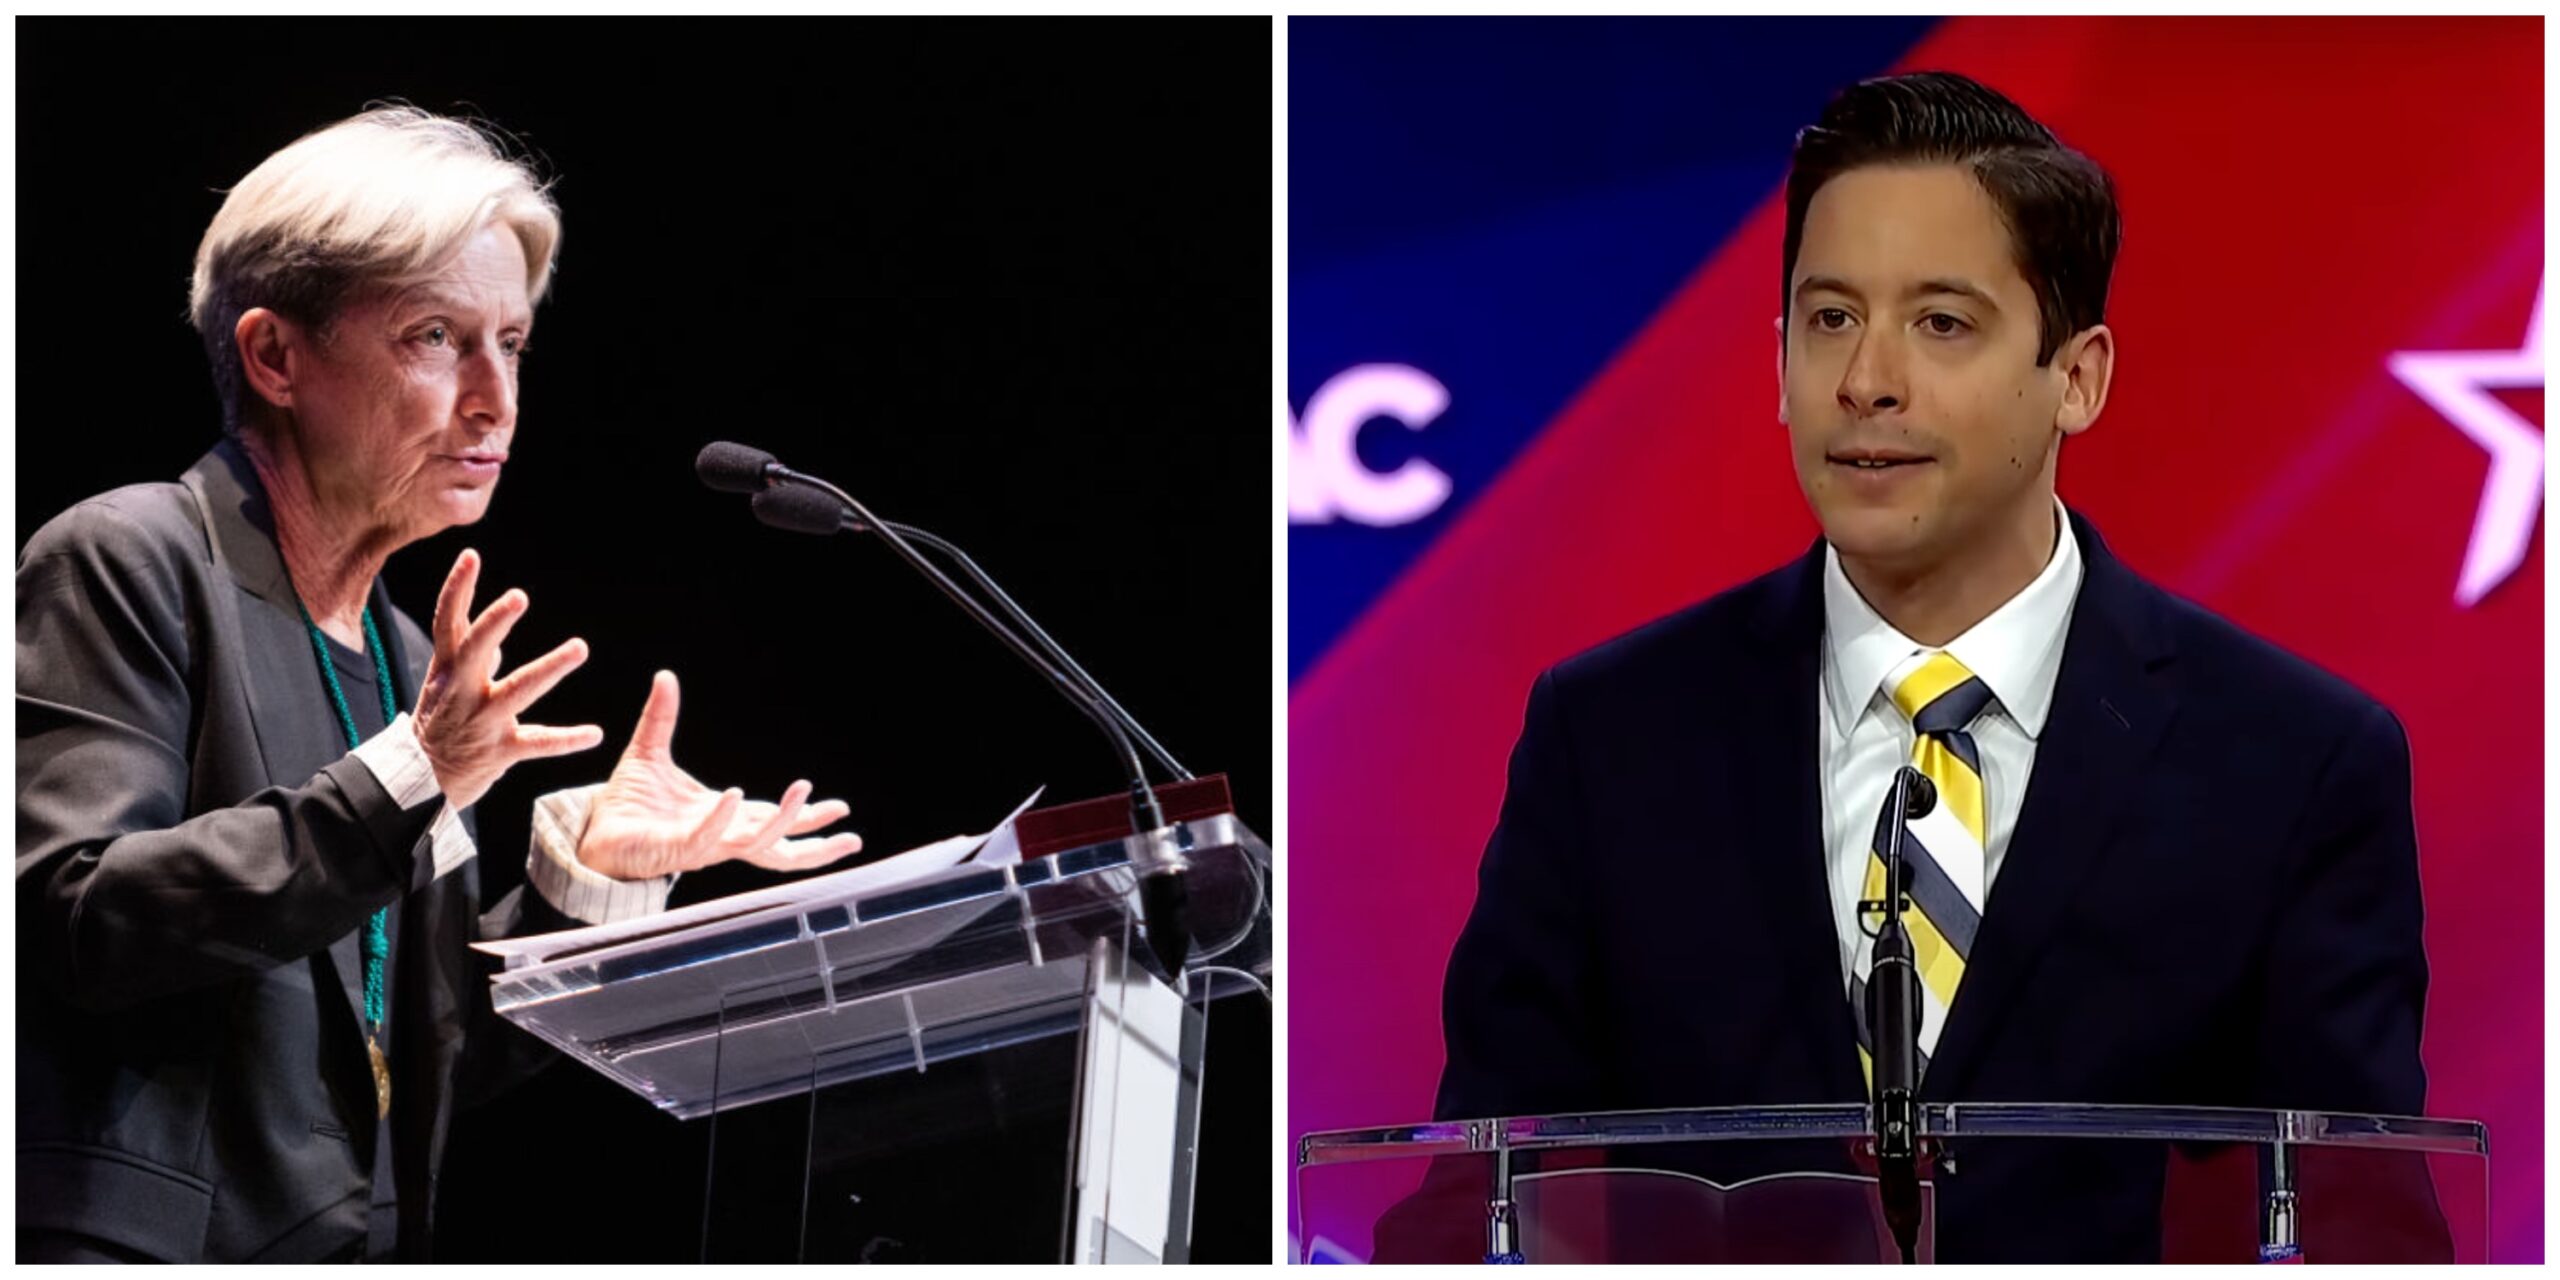 Proposed: “Author Accuses Michael Knowles of Fascism Over Transgender Stance